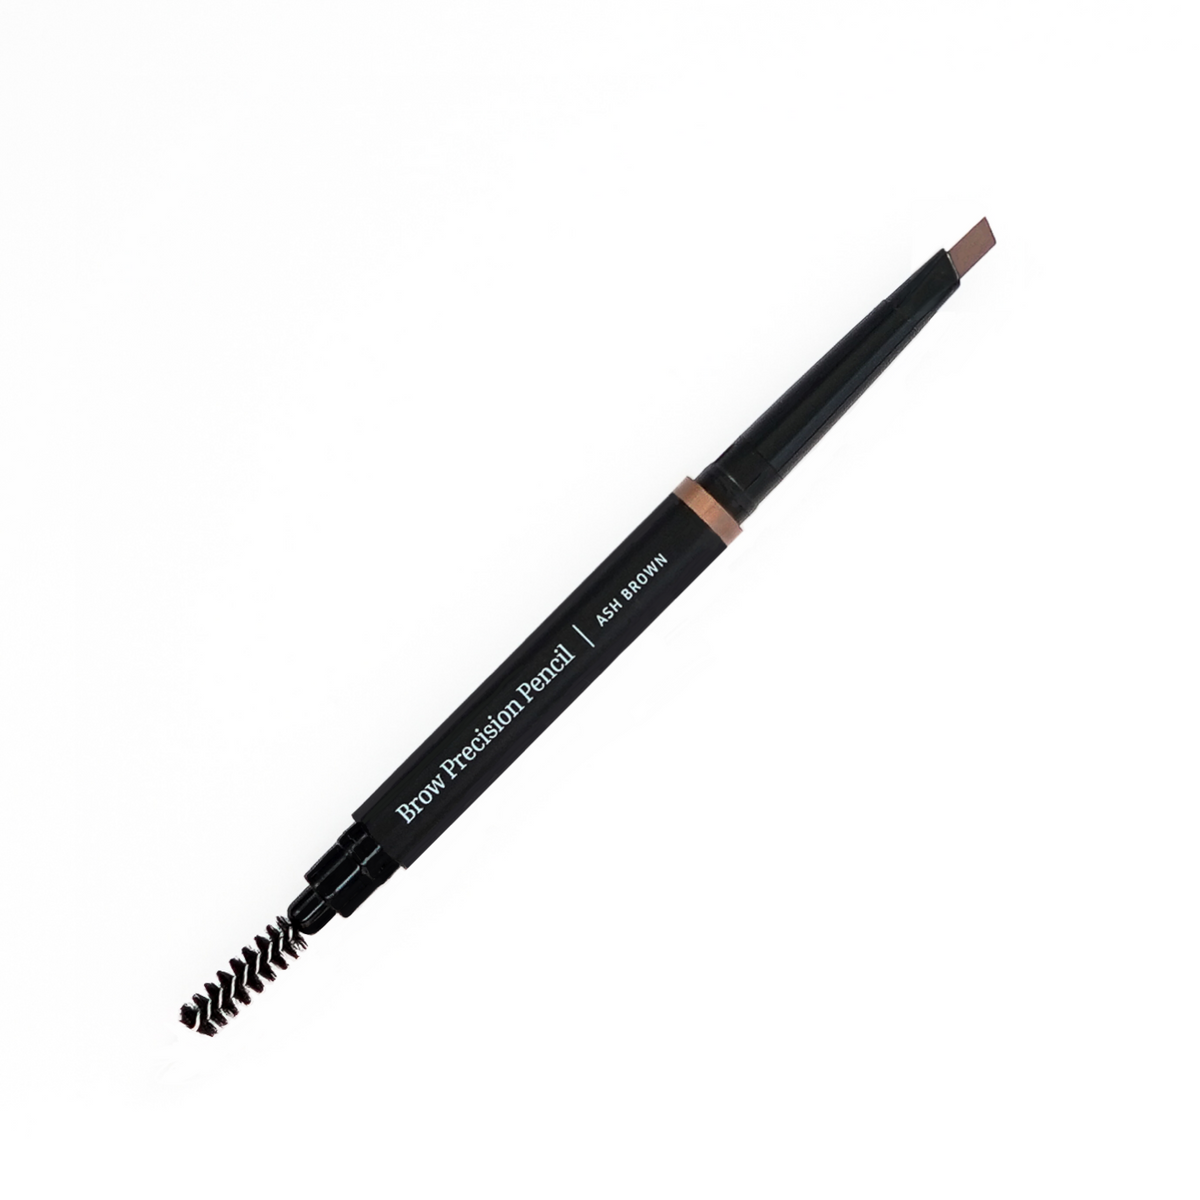 Lithe Lashes Beauty Accessories Brow Precision Pencil product image of the ash brown brow pencil on a white background, place on a bottom left to upper right diagonal placement.